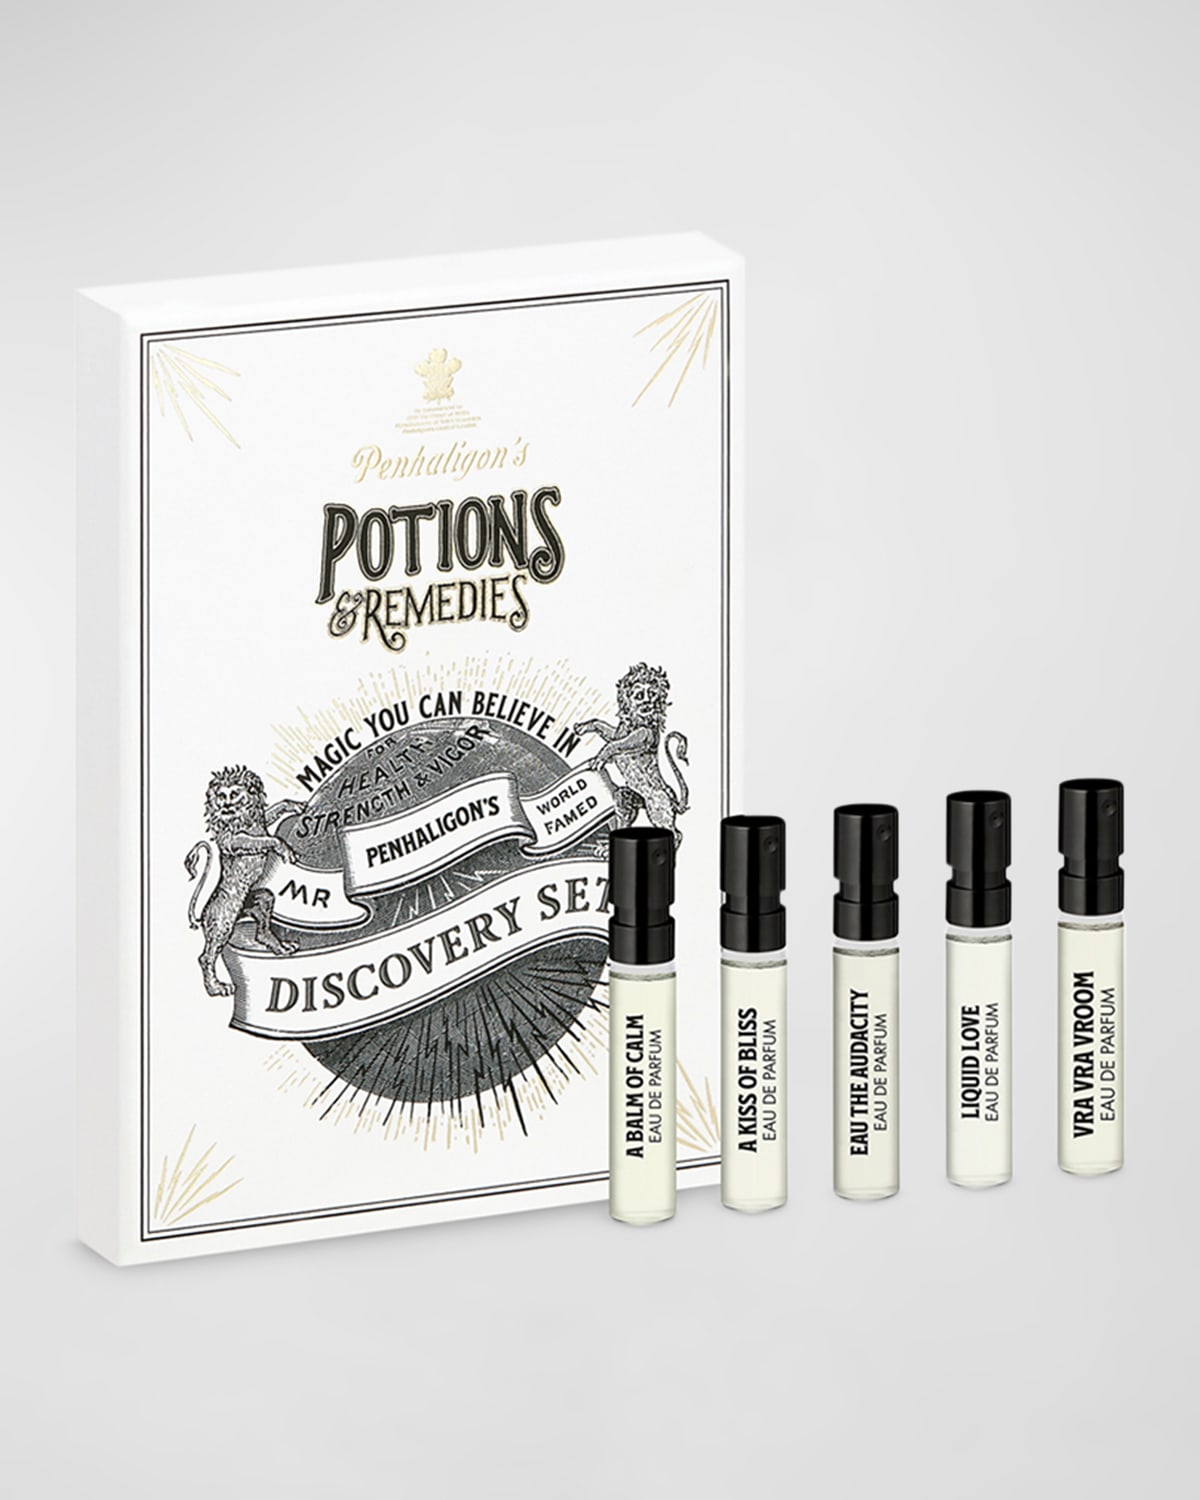 Potions & Remedies Discovery Set